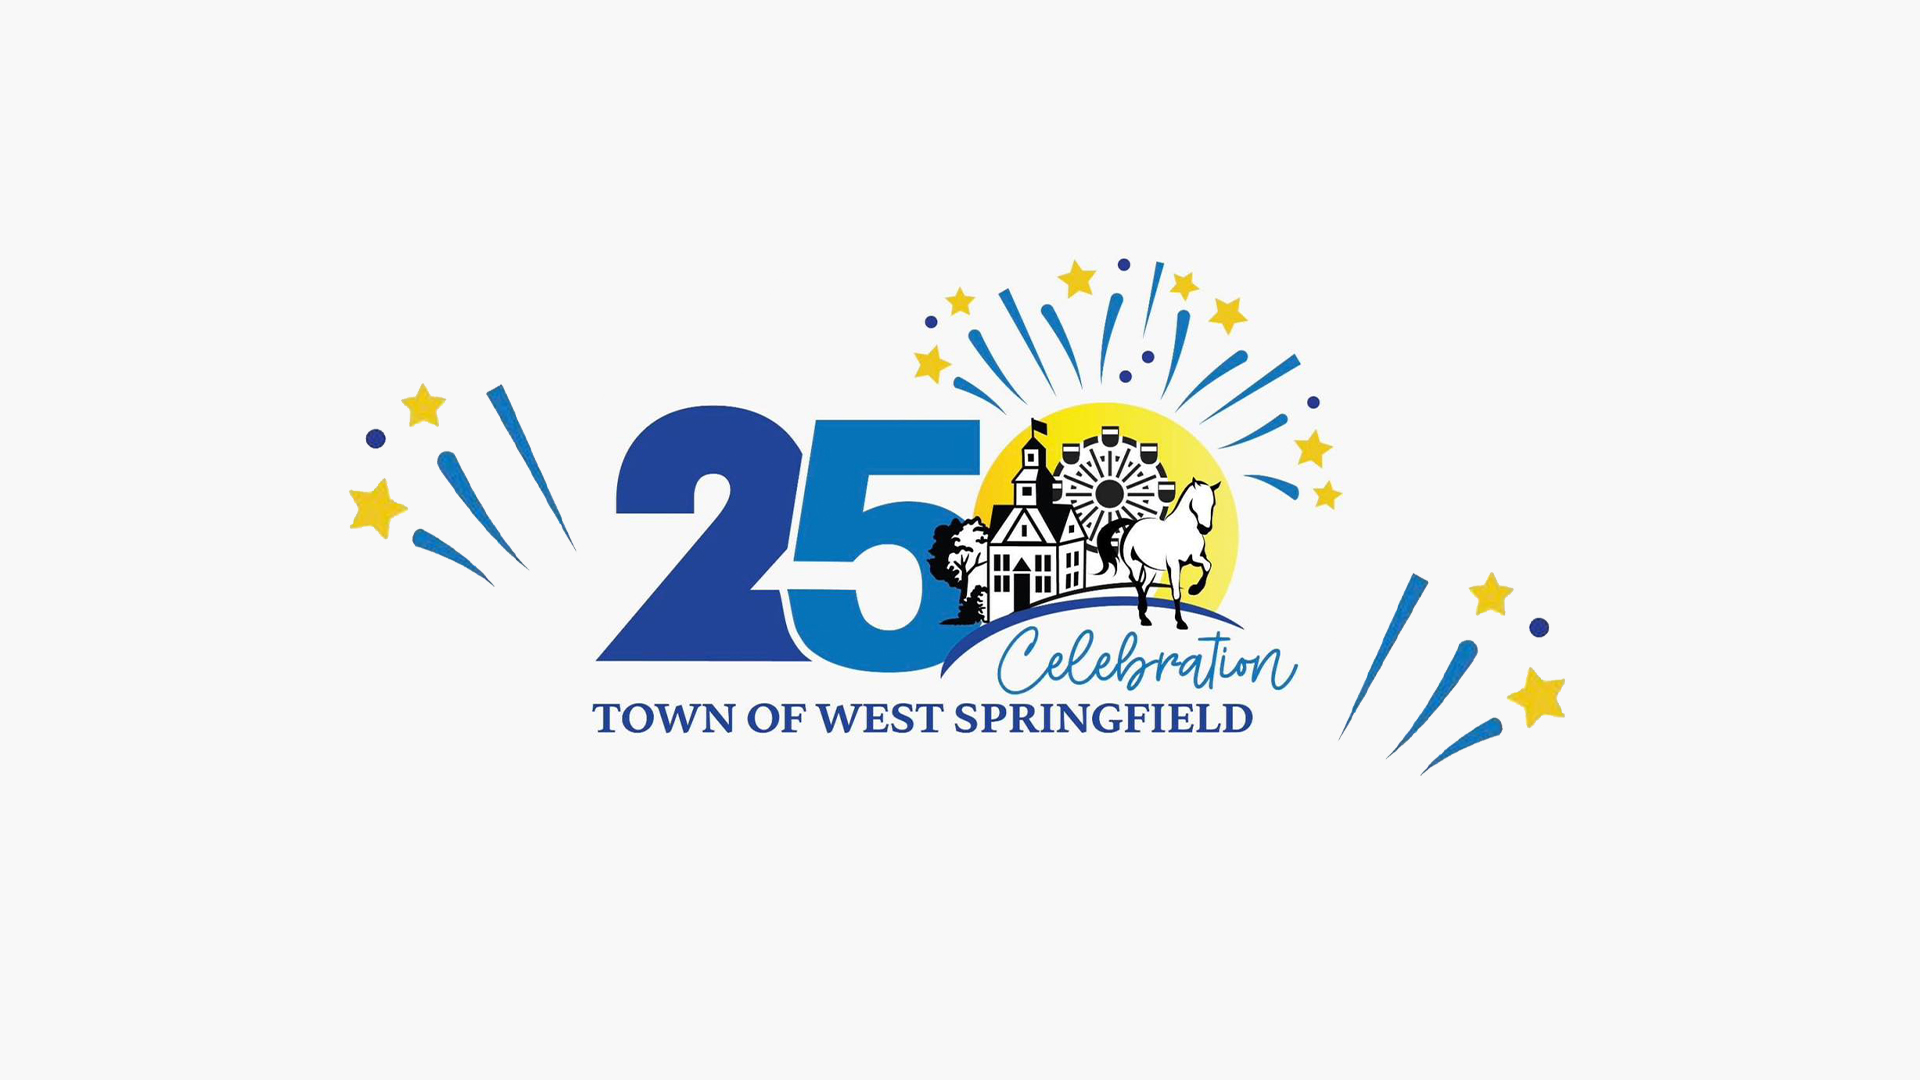 Logo for the Town of West Springfield’s 250 celebration